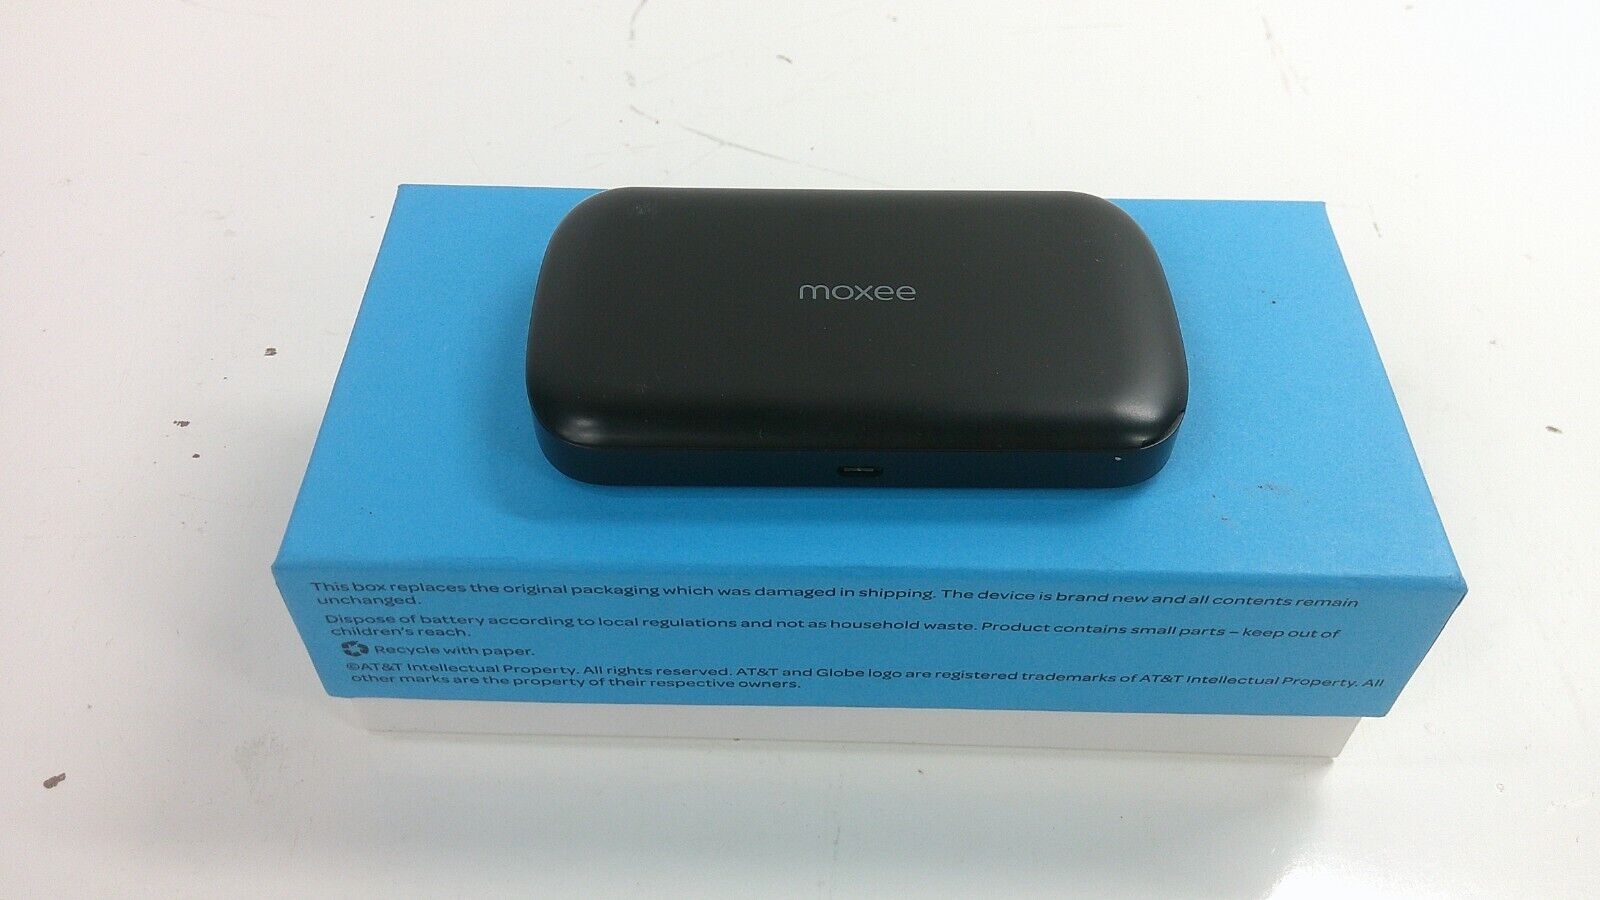 Moxee AT&T K779HSDL Mobile Hotspot - Black  - New In Box